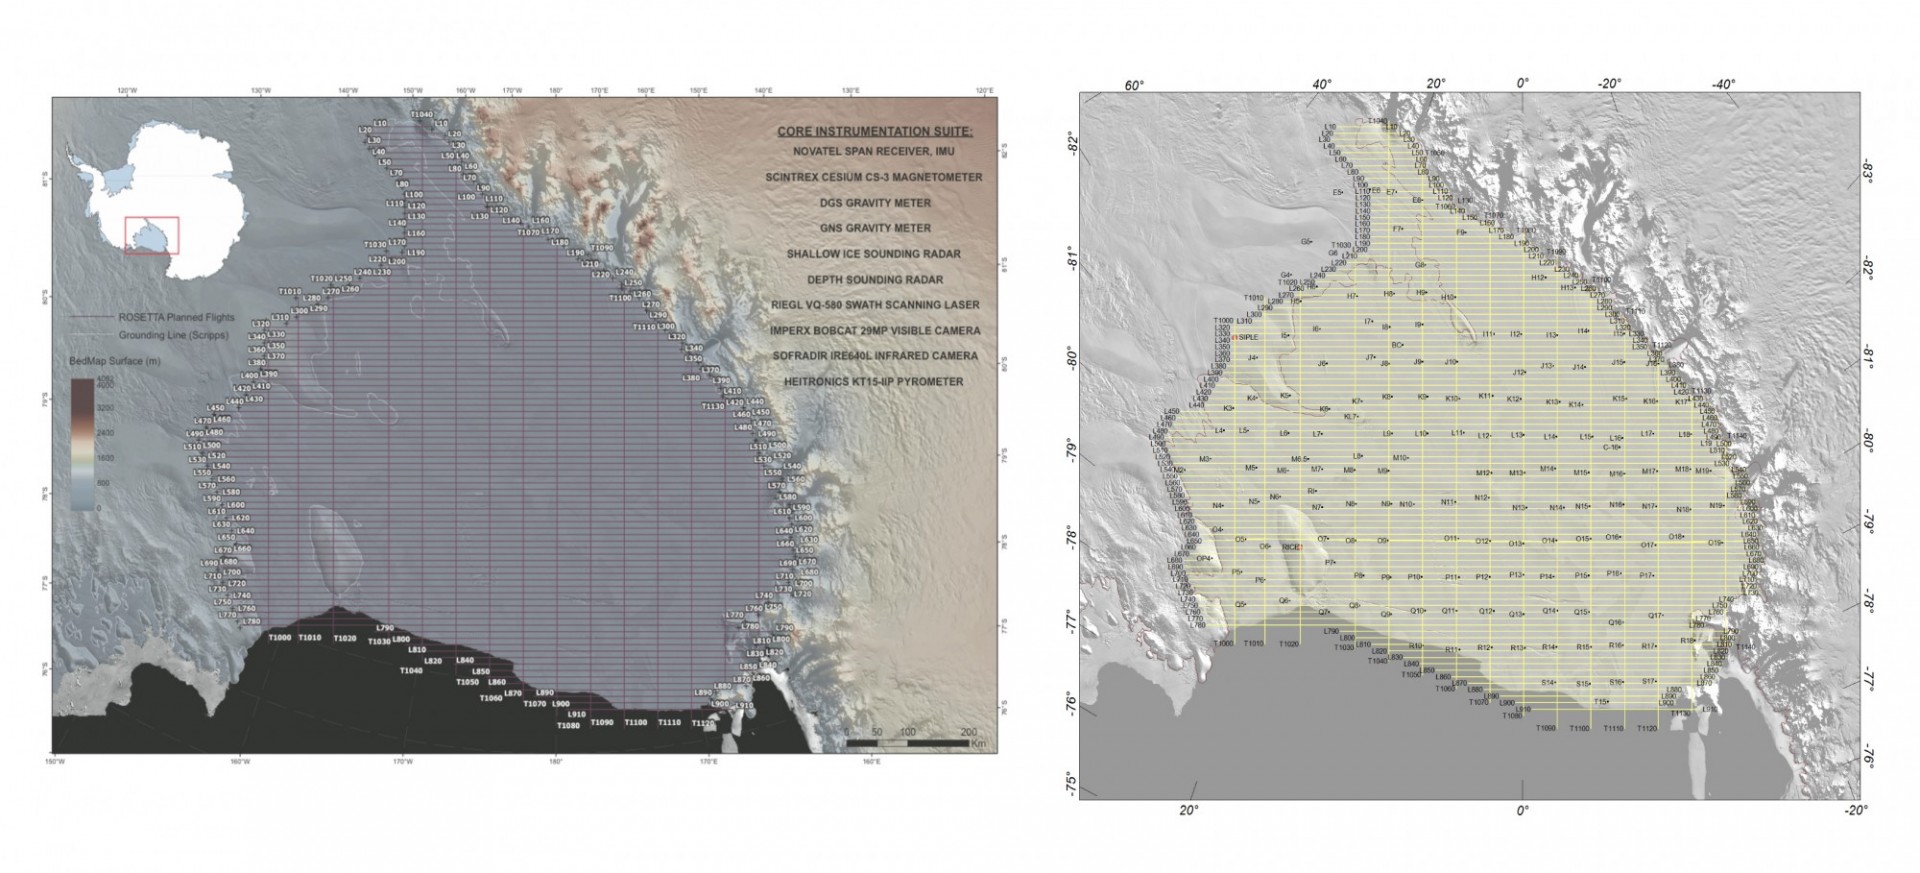 Two images of the Ross Ice Shelf with Rosetta Survey Grid overlain. Description below.